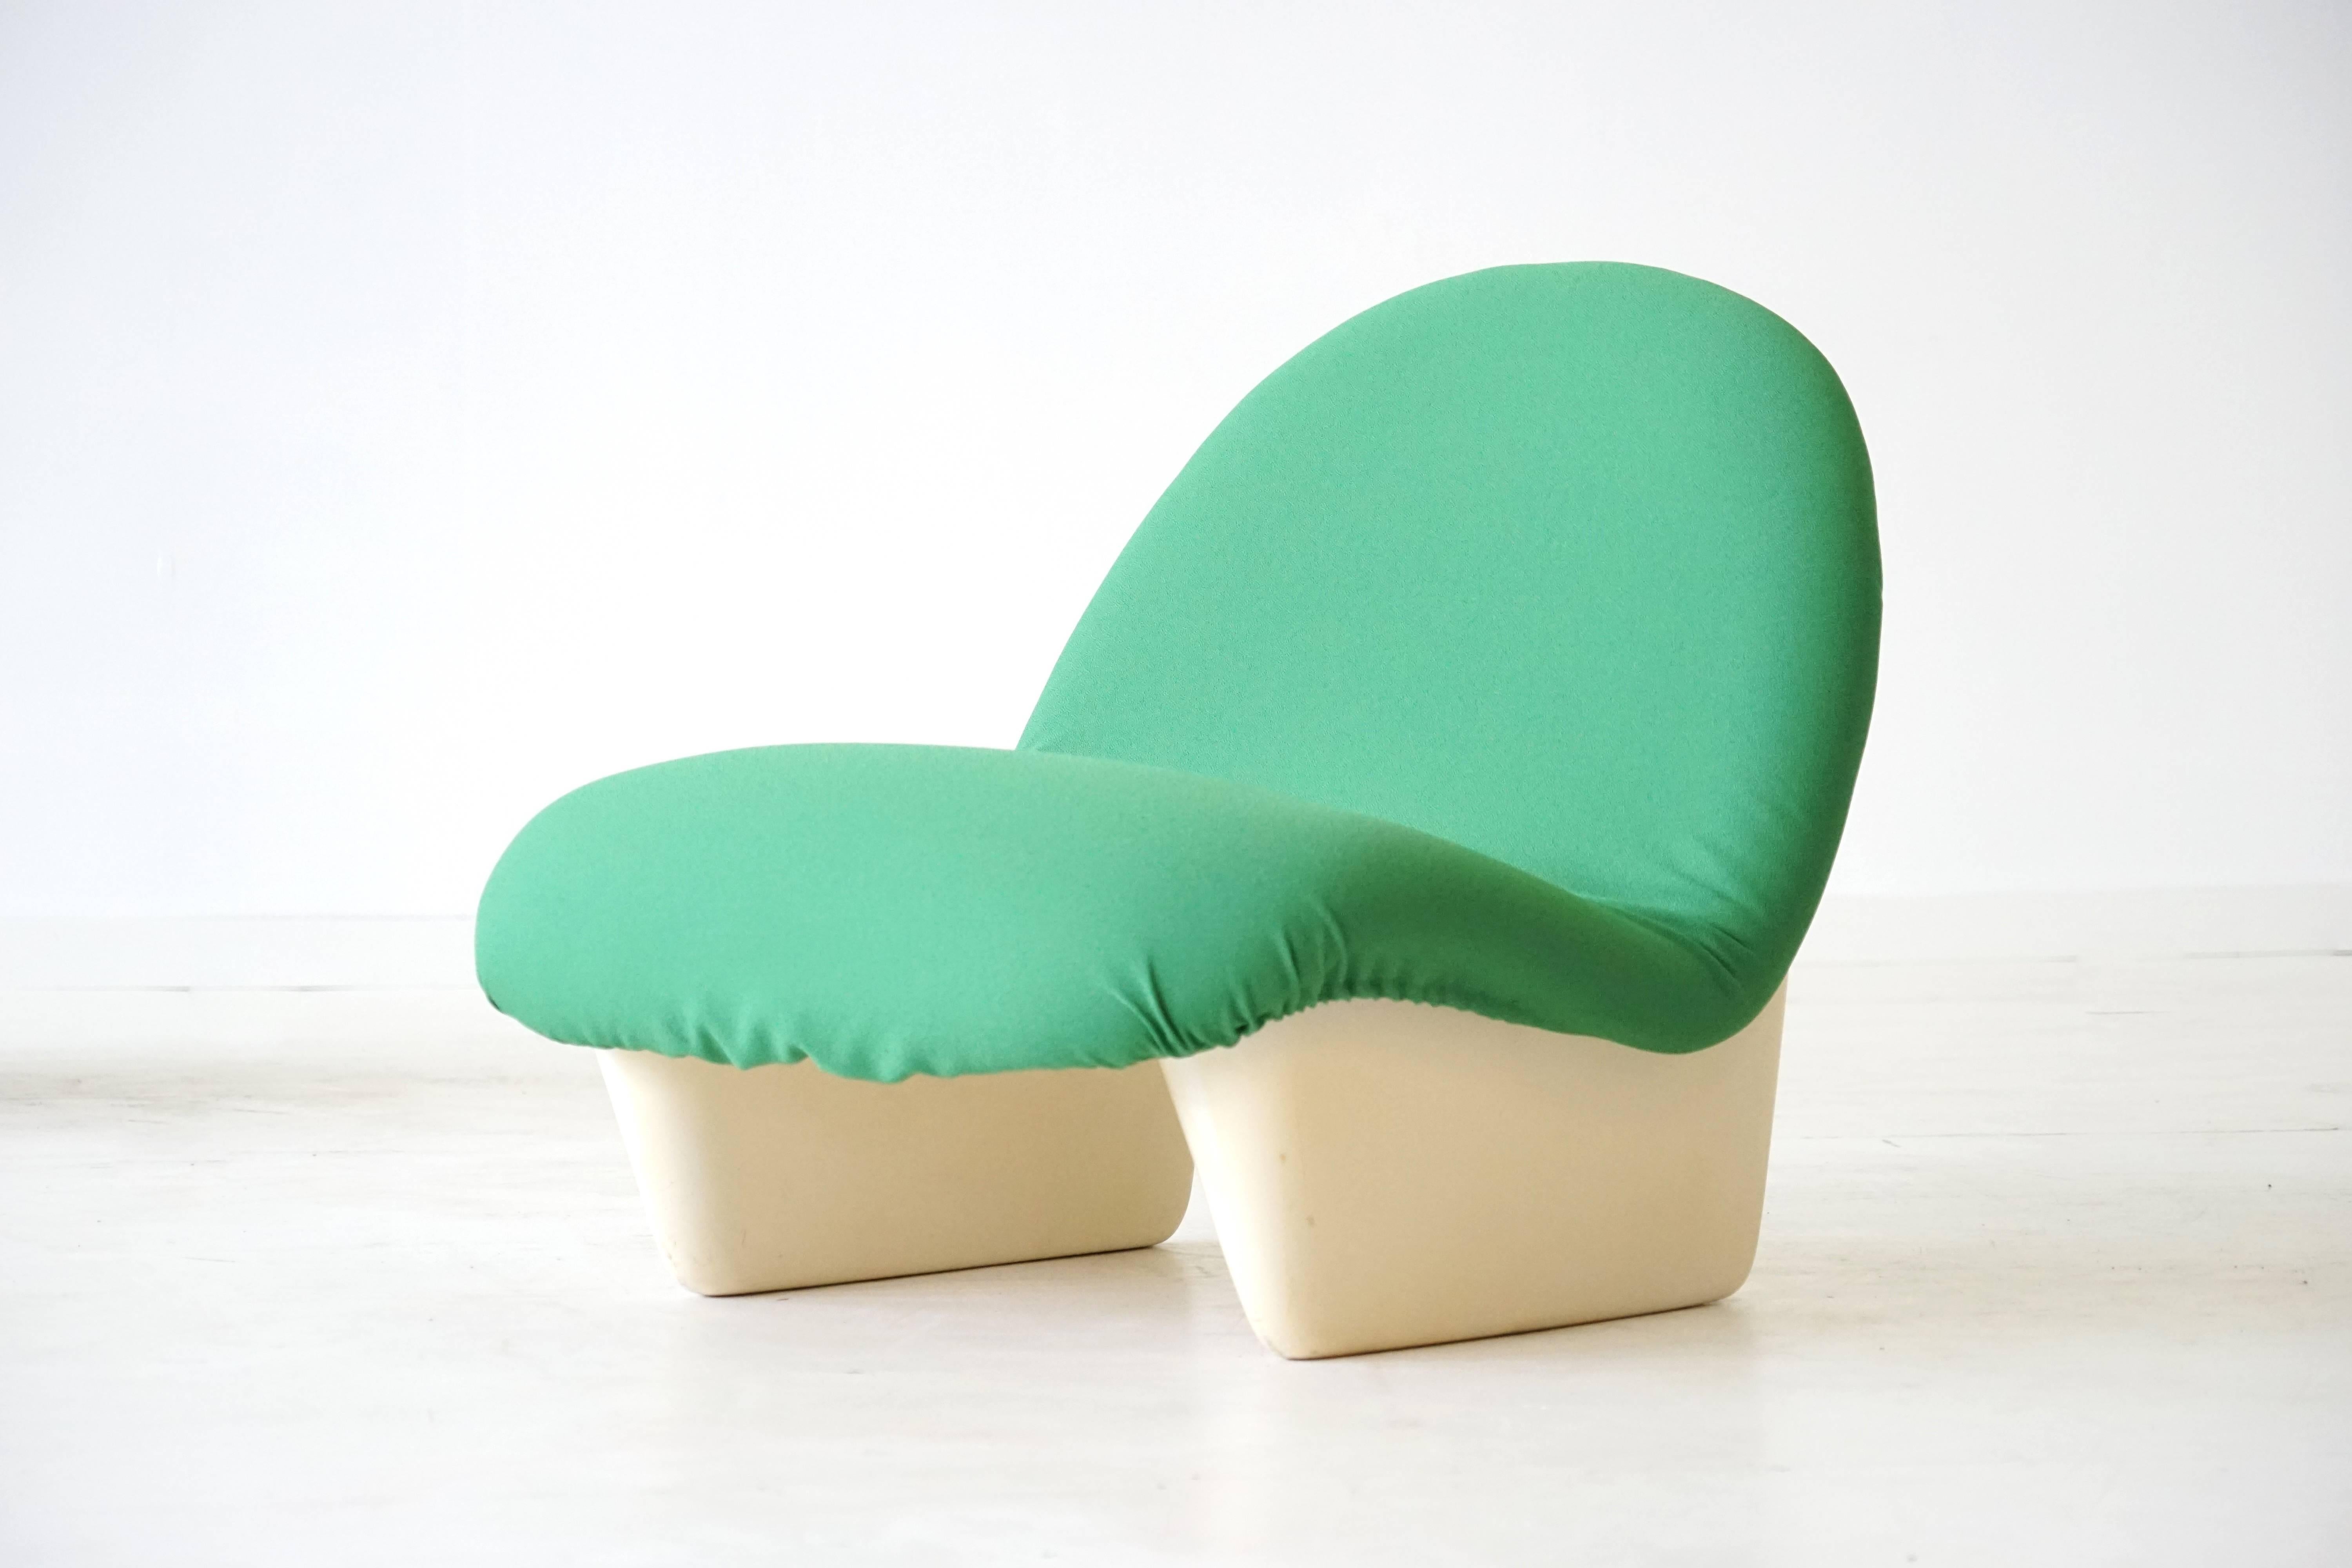 Sadima chairs by Luigi Colani, BASF 1970s, Space Age
Shell in plastic, upholstered in green fabric.
Perfect condition, early production.